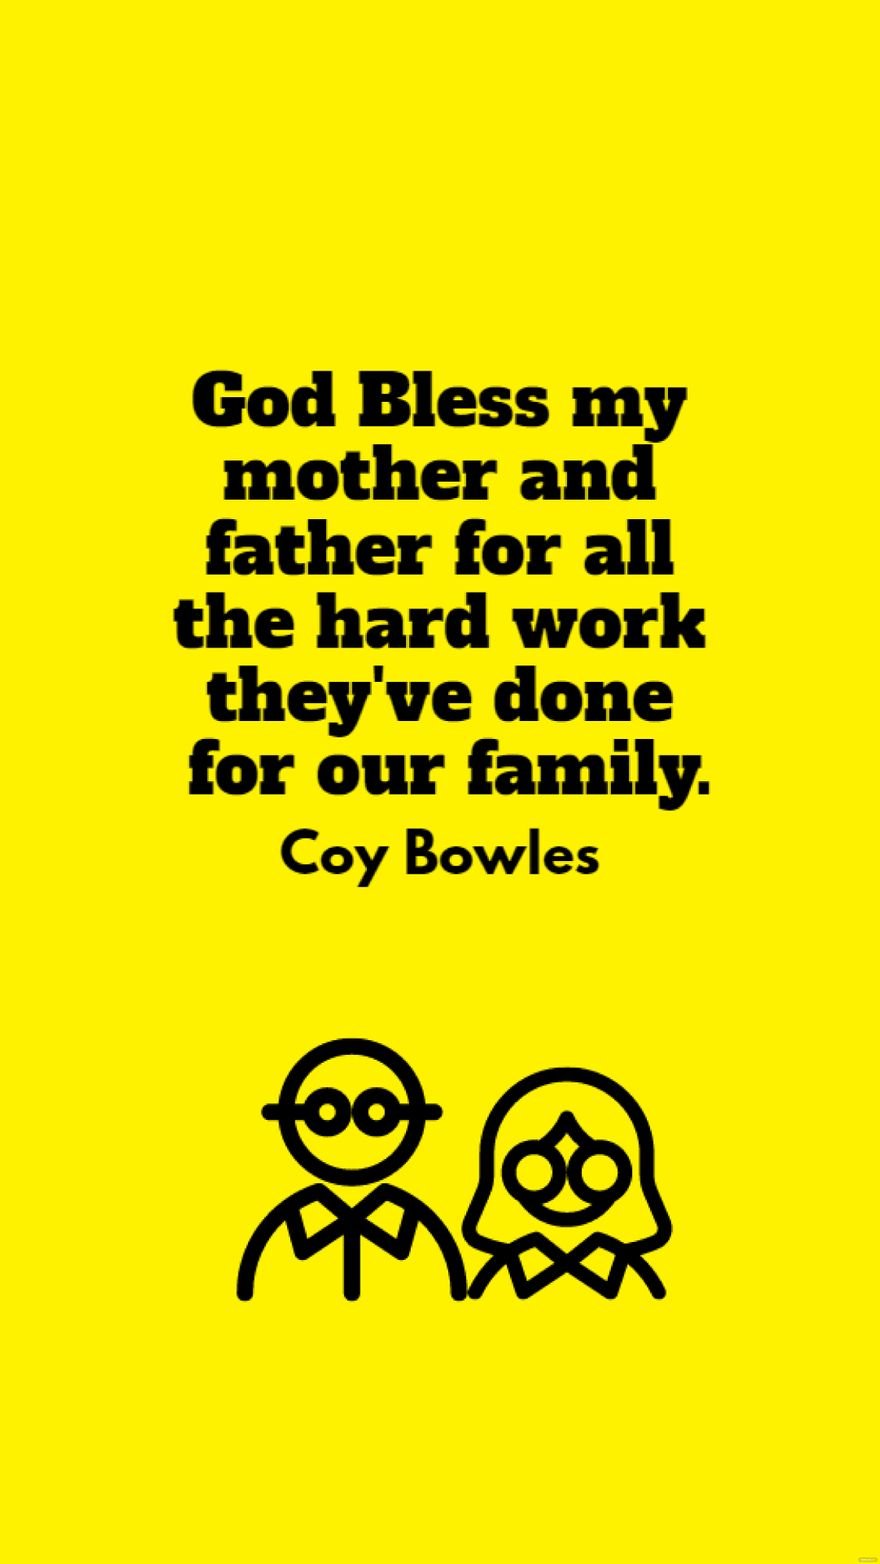 Coy Bowles - God Bless my mother and father for all the hard work they've done for our family. in JPG